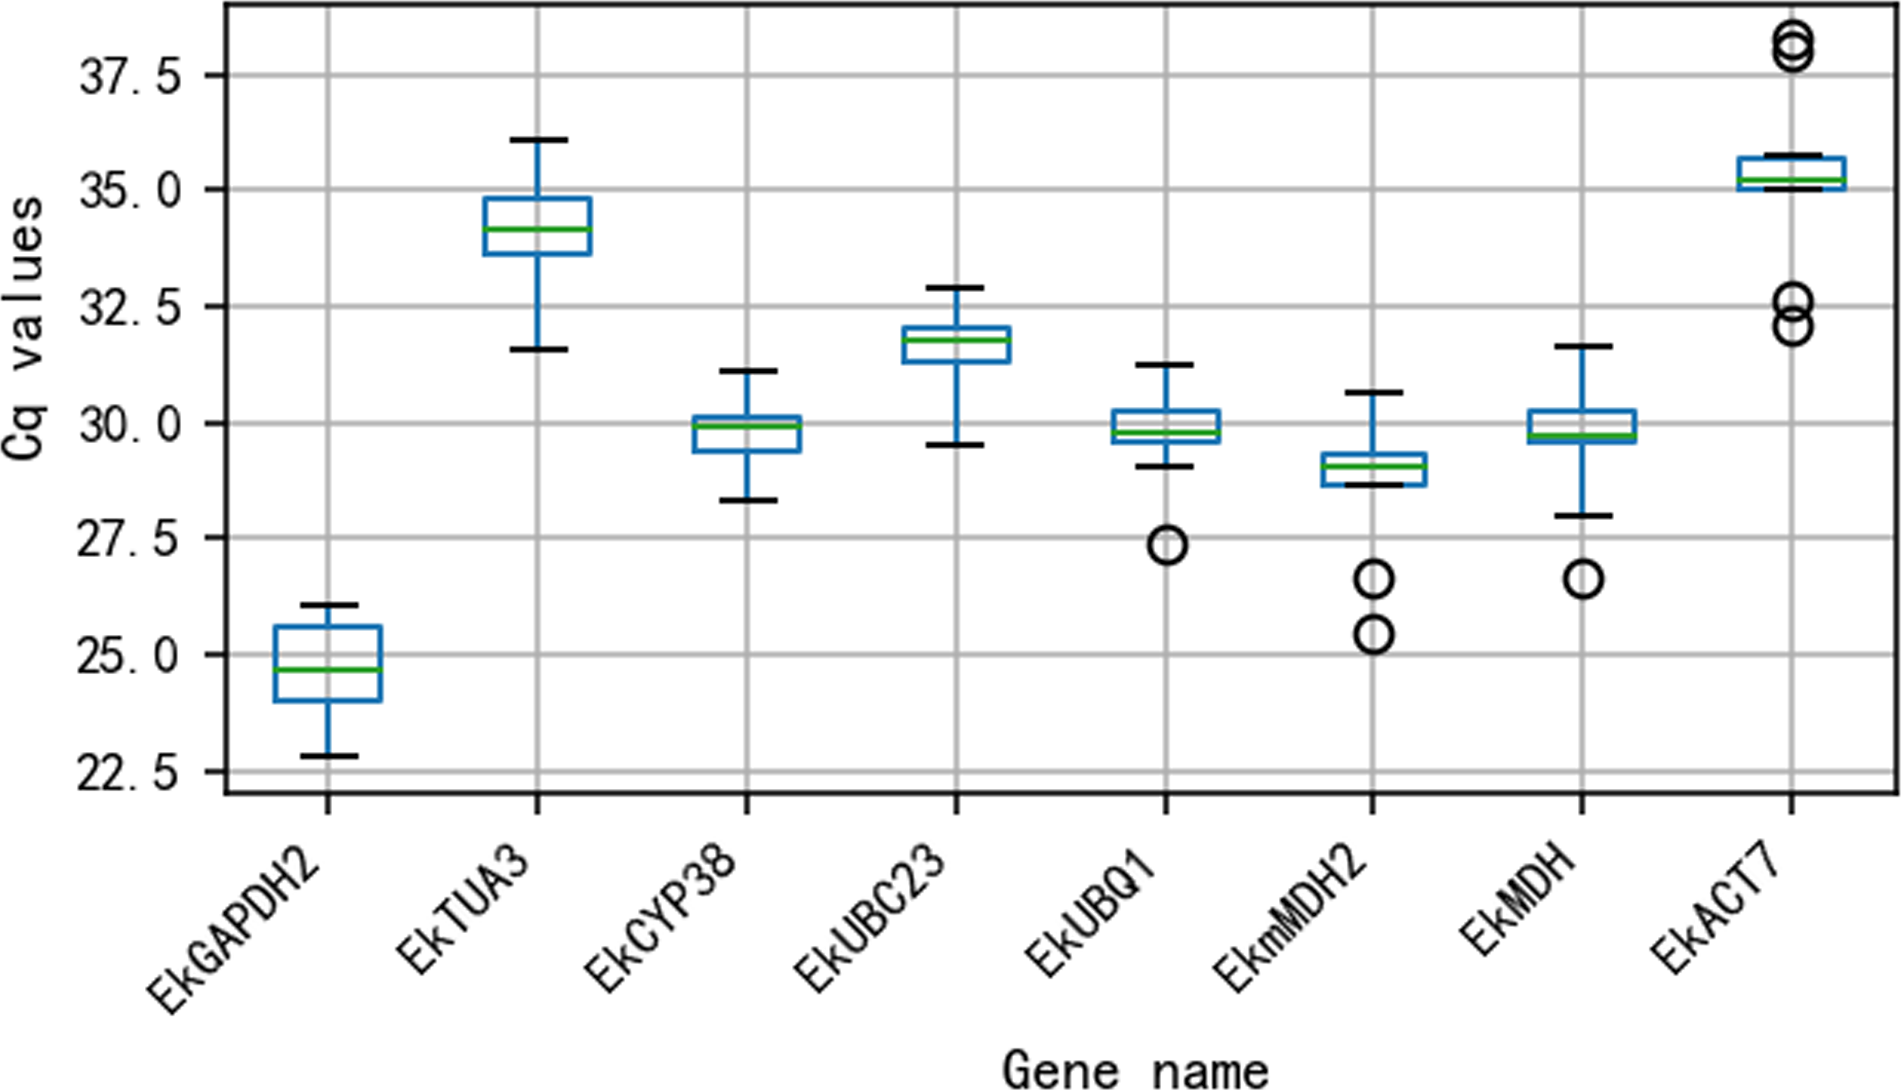 Comprehensive transcriptome analysis of reference genes for fruit 